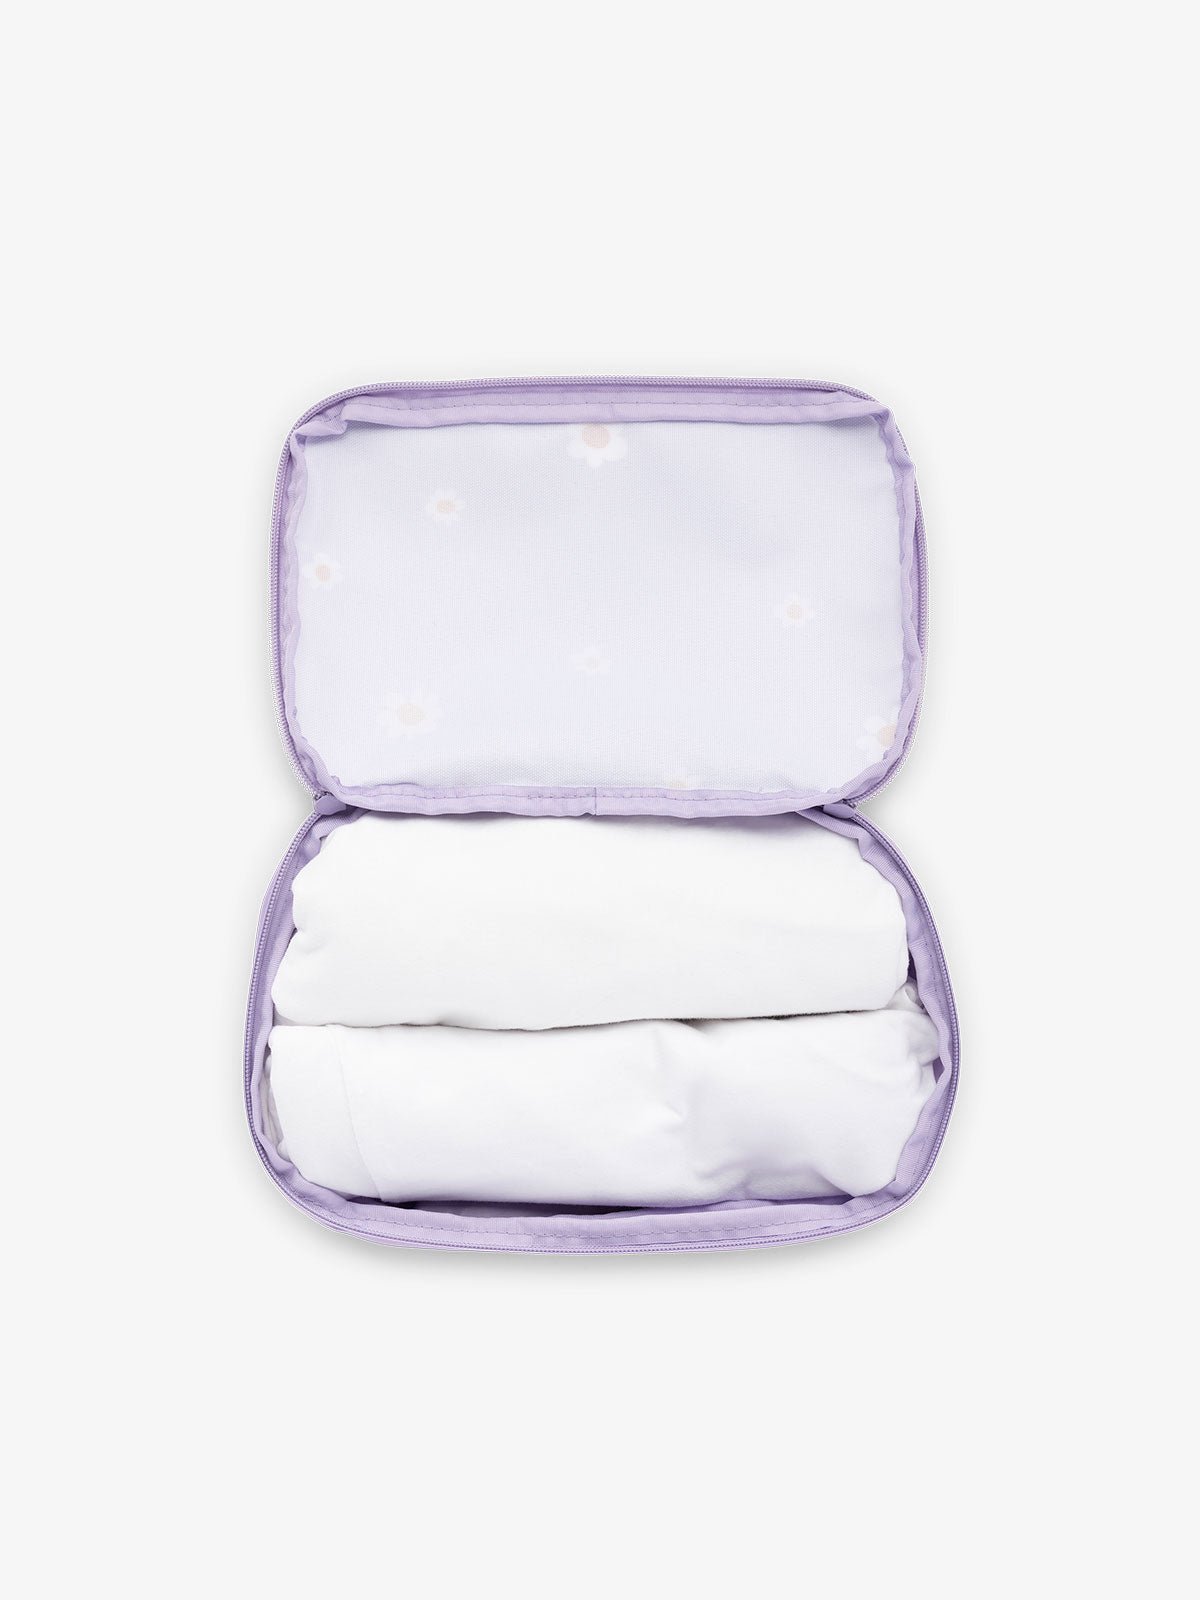 CALPAK small packing cubes for travel made with durable material in purple floral print